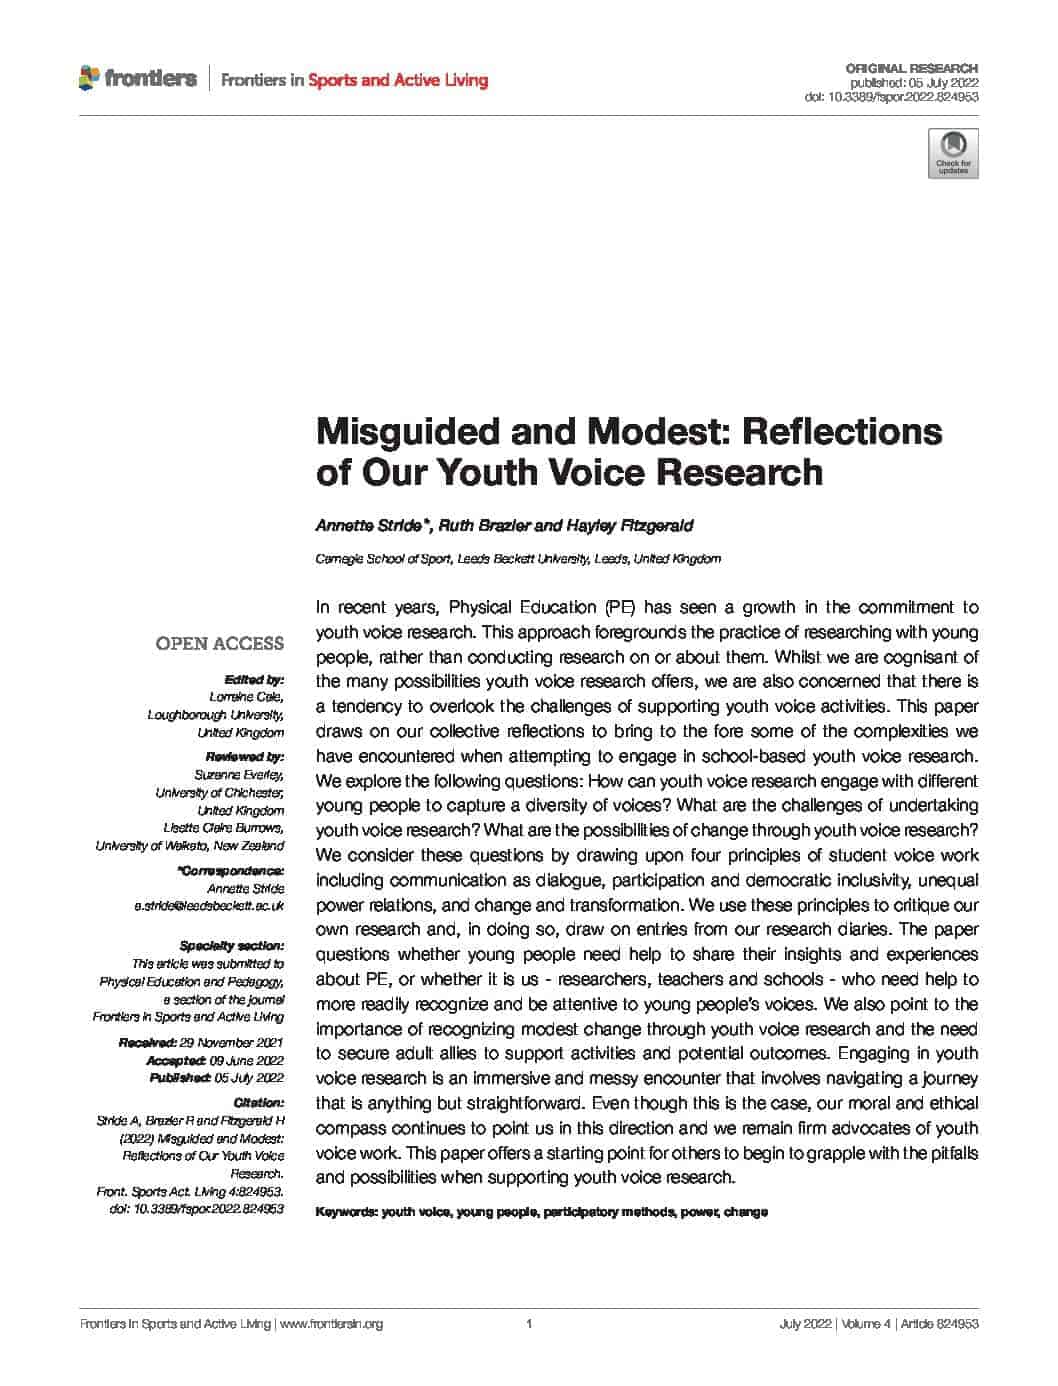 Misguided and Modest: Reflections of Our Youth Voice Research